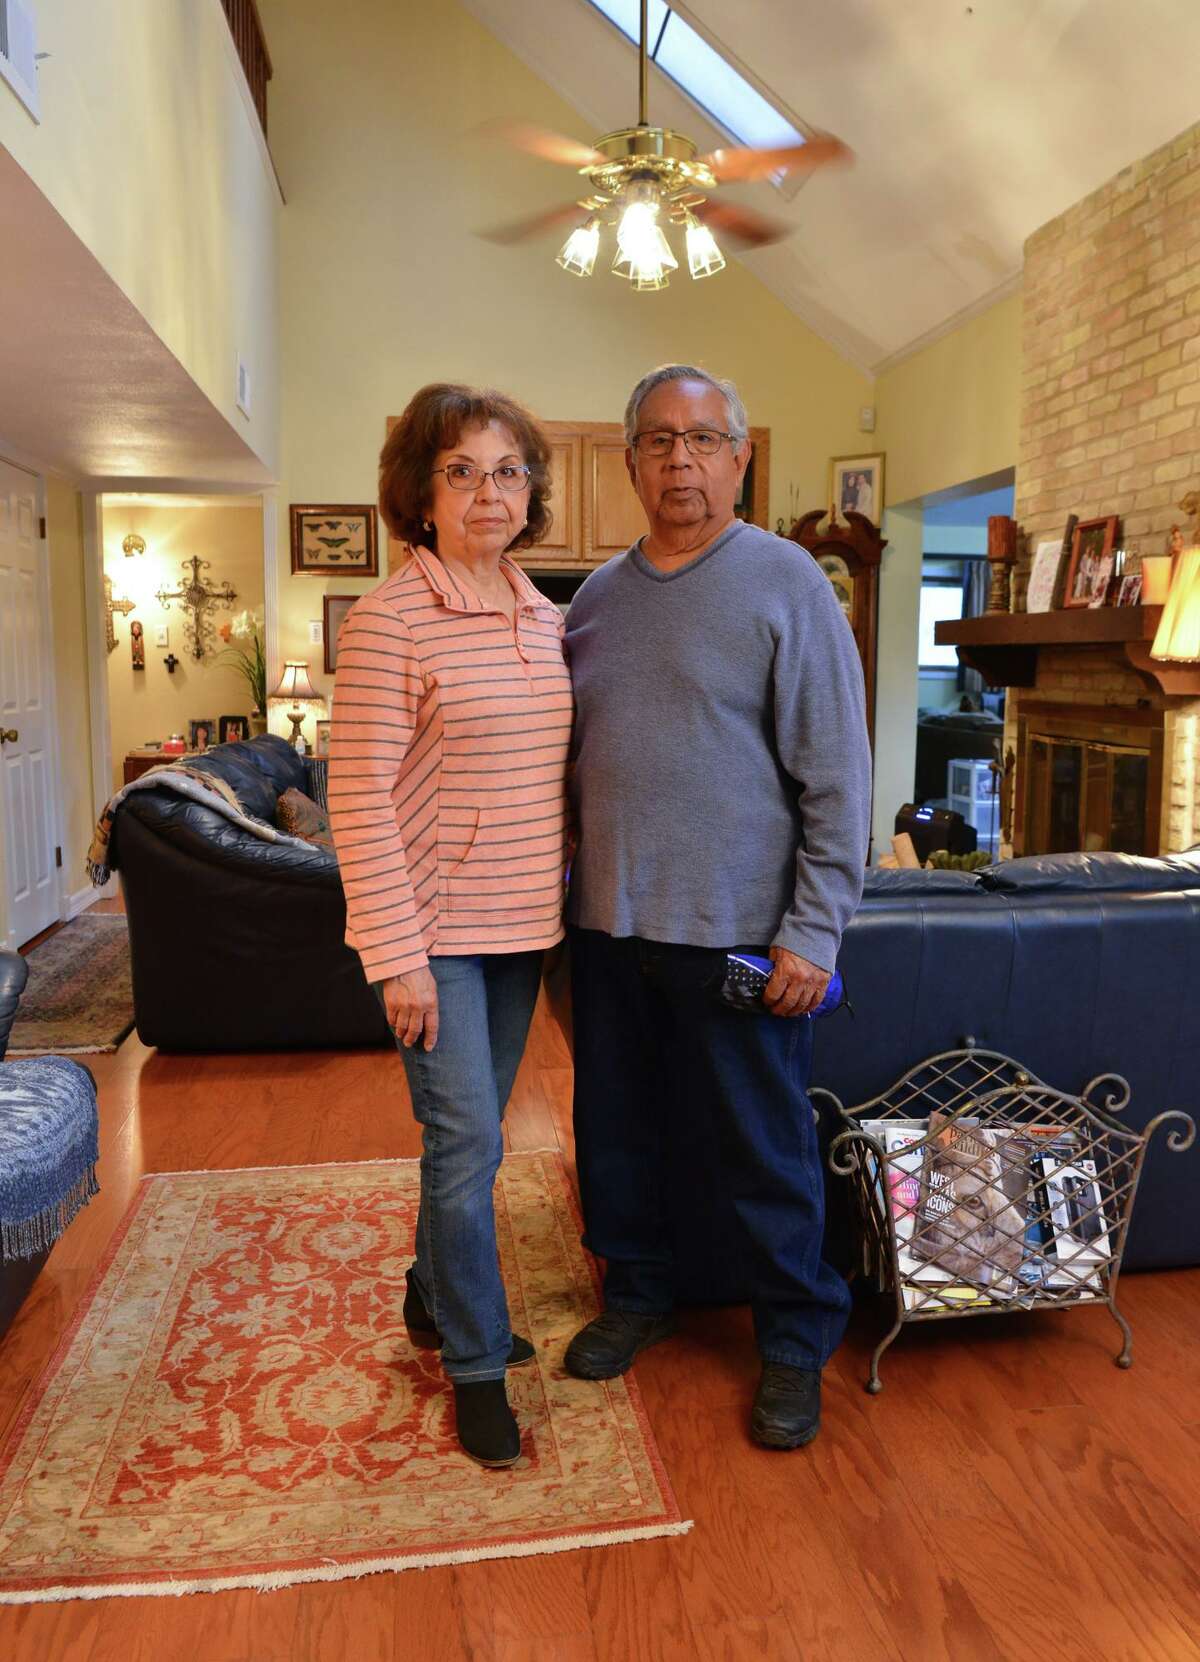 Robert Renteria and his wife, Cynthia, of San Antonio, both had COVID-19 in the summer. They are participating in a global study of the neurological effects of the coronavirus. Leading the study is the Glenn Biggs Institute for Alzheimer’s and Neurodegenerative Diseases at UT Health San Antonio.